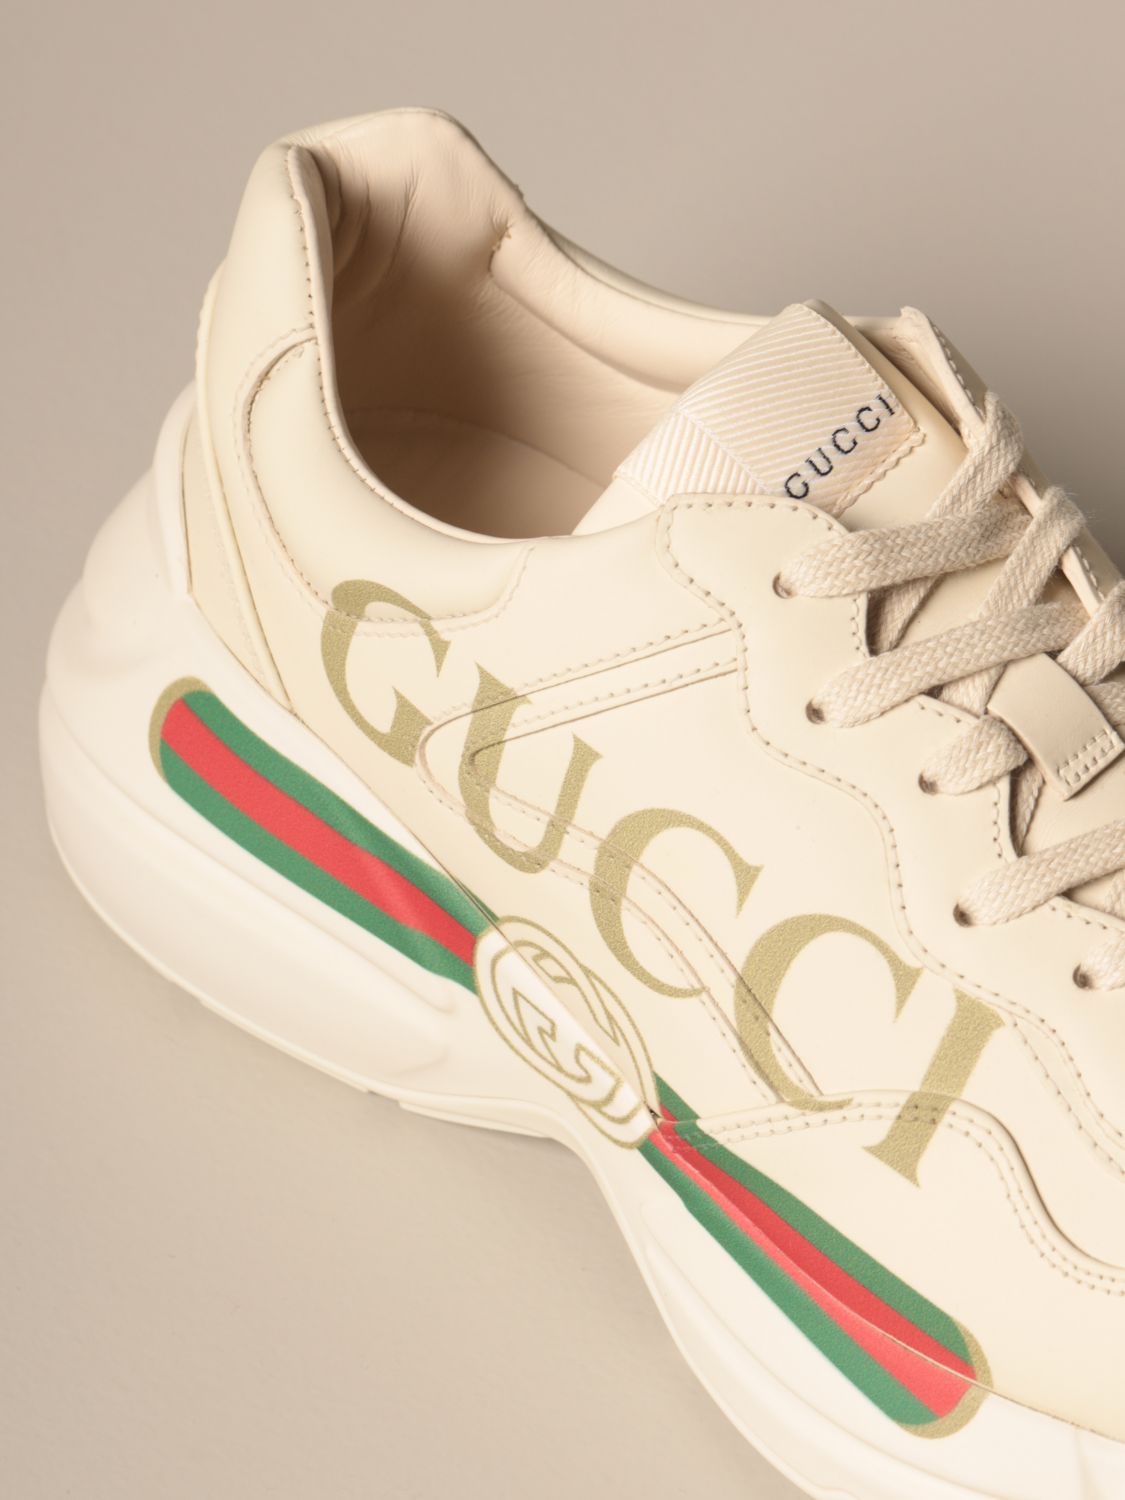 GUCCI: Rhyton sneakers in leather with vintage logo | Sneakers Gucci